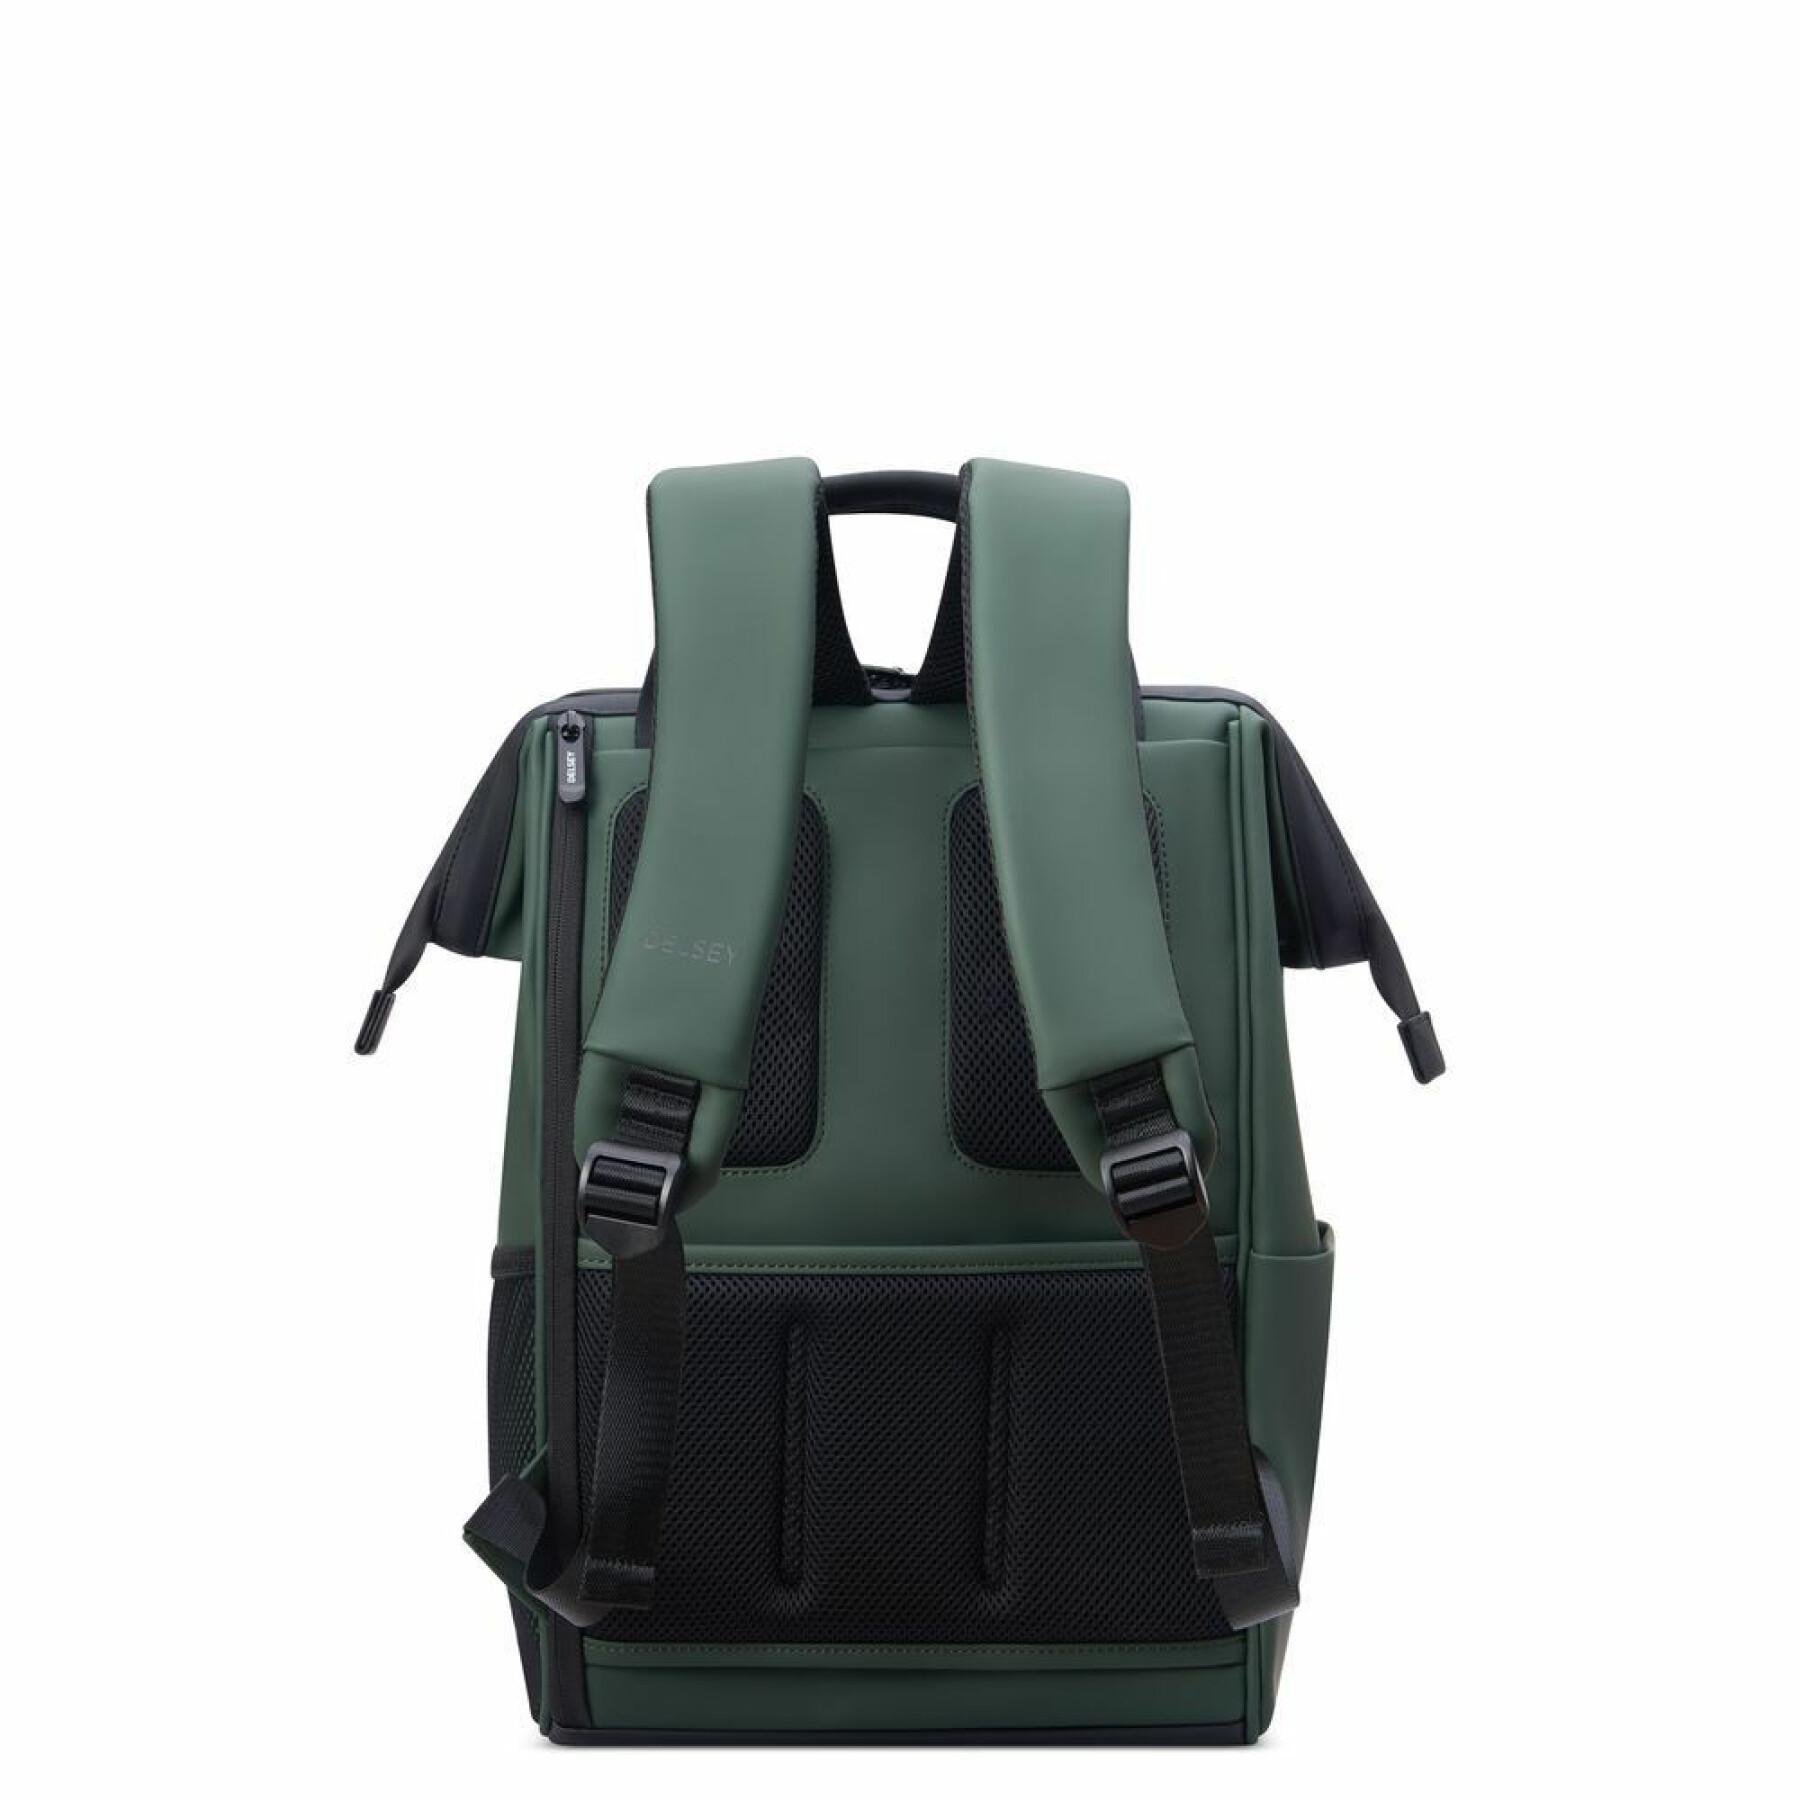 Backpack 1 compartment pc 14" Delsey Turenne